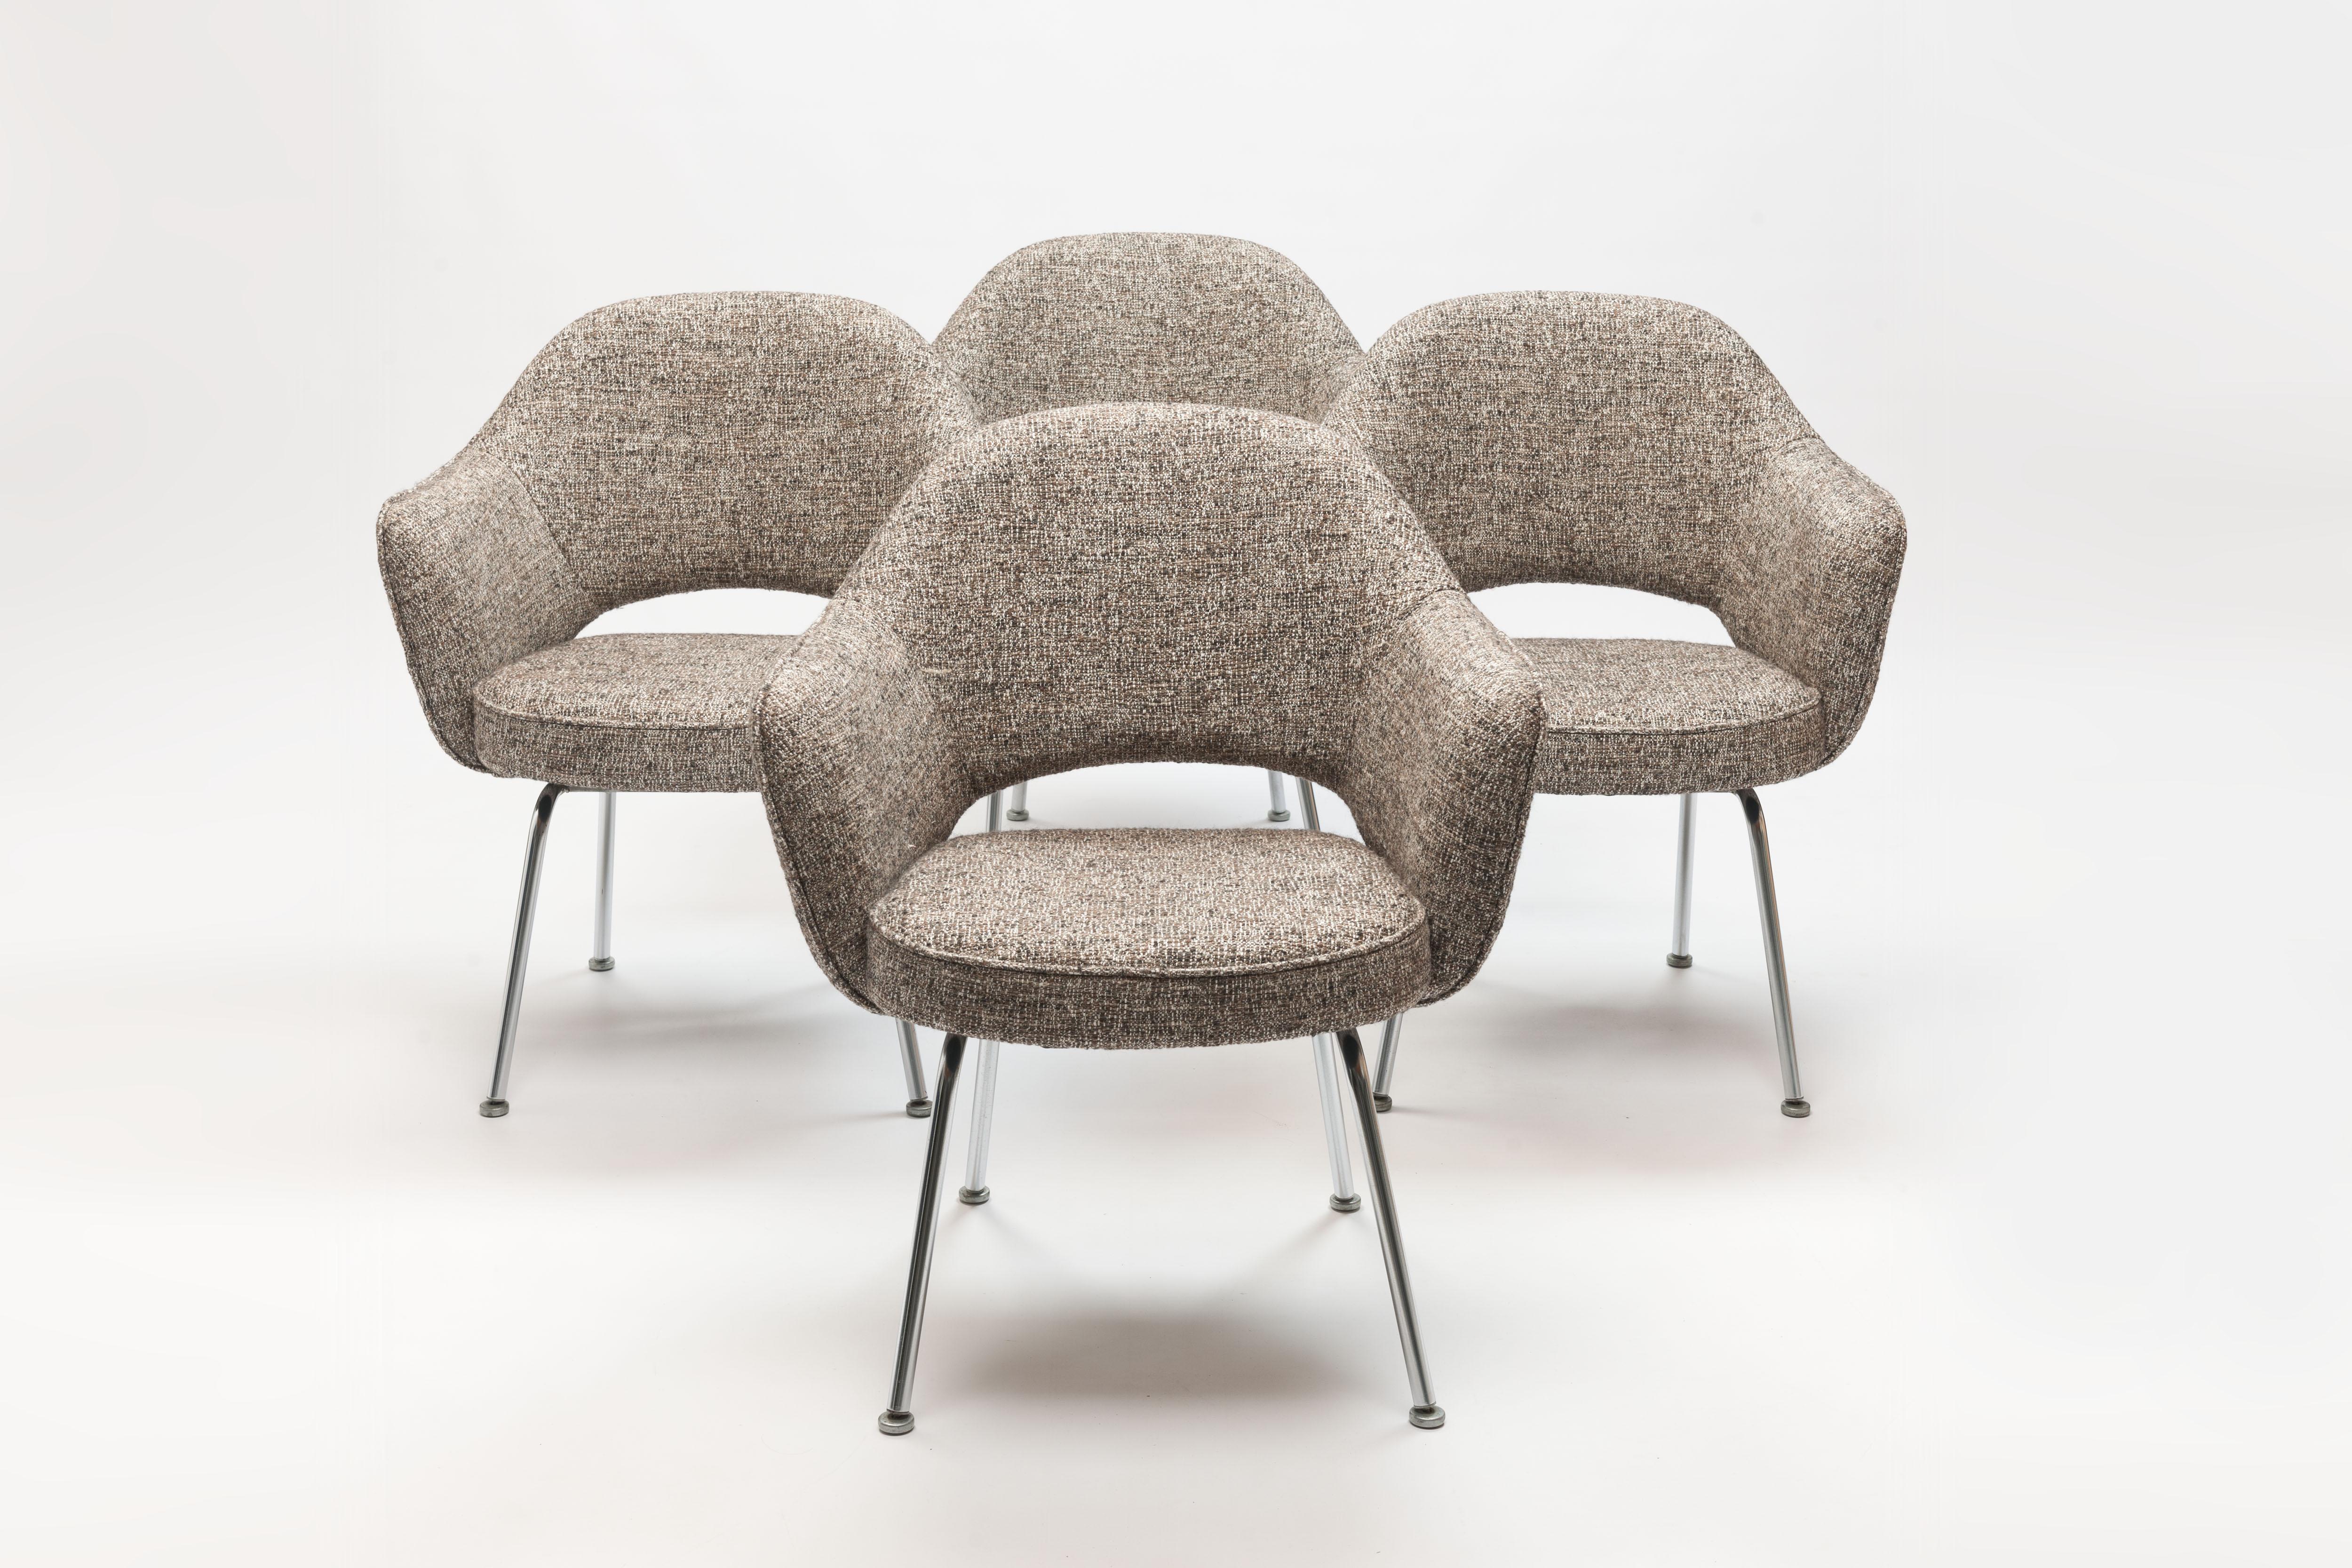 Set of four vintage Eero Saarinen executive arm chairs. Reupholstered -including completely new interiors- in a beautiful exclusive coarse woven linen-wool fabric with a lot of texture and irregularity.
Beautiful set of chairs with exceptional